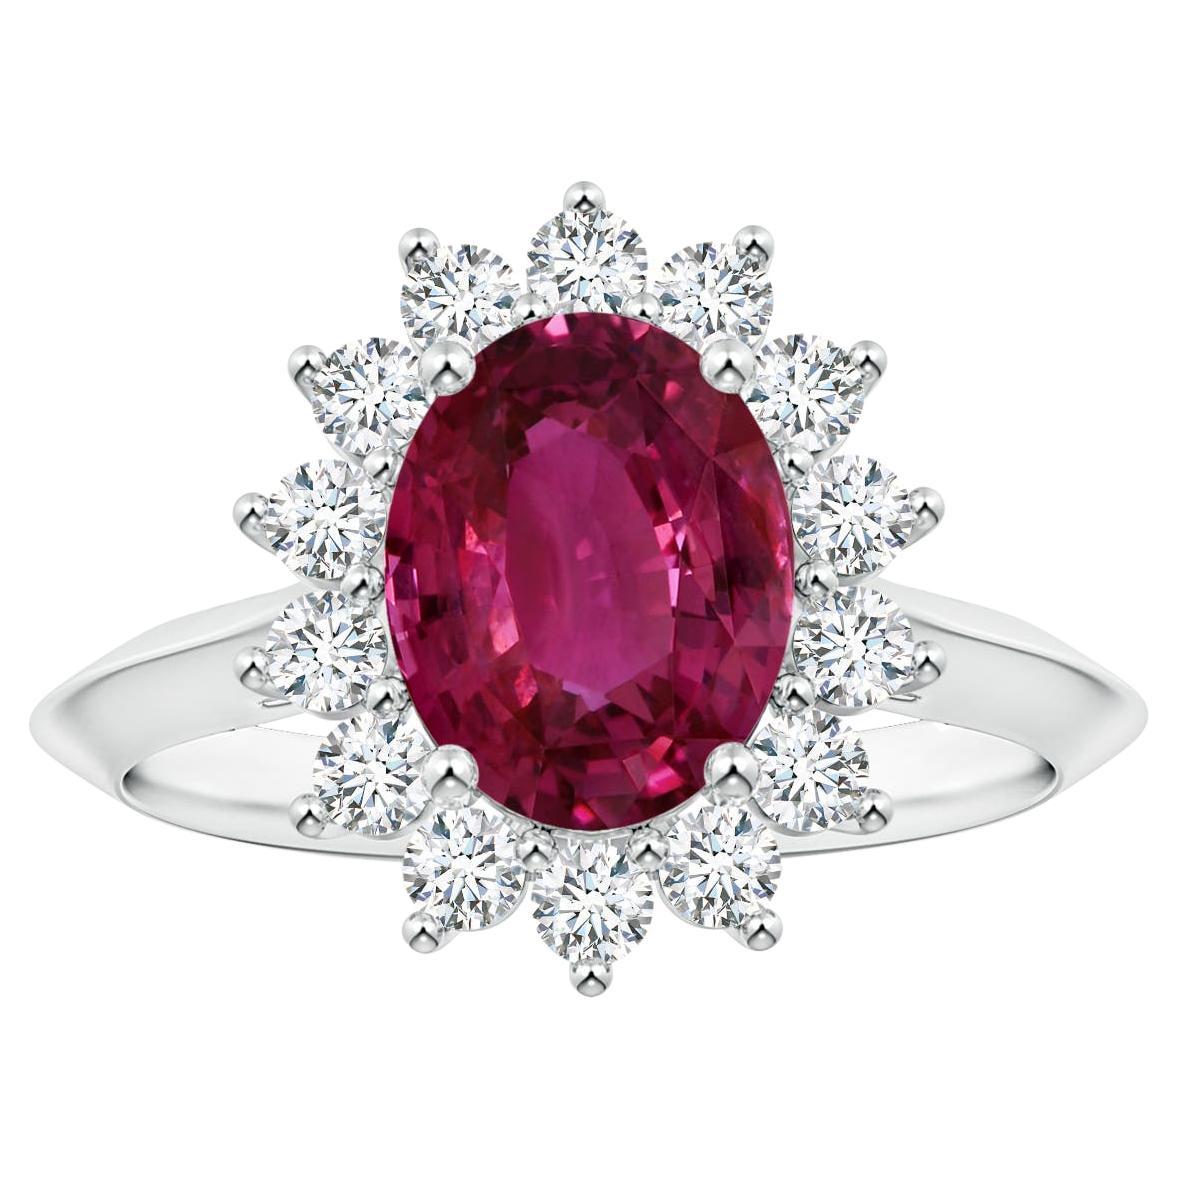 ANGARA Princess Diana Inspired GIA Certified Pink Sapphire Ring in White Gold